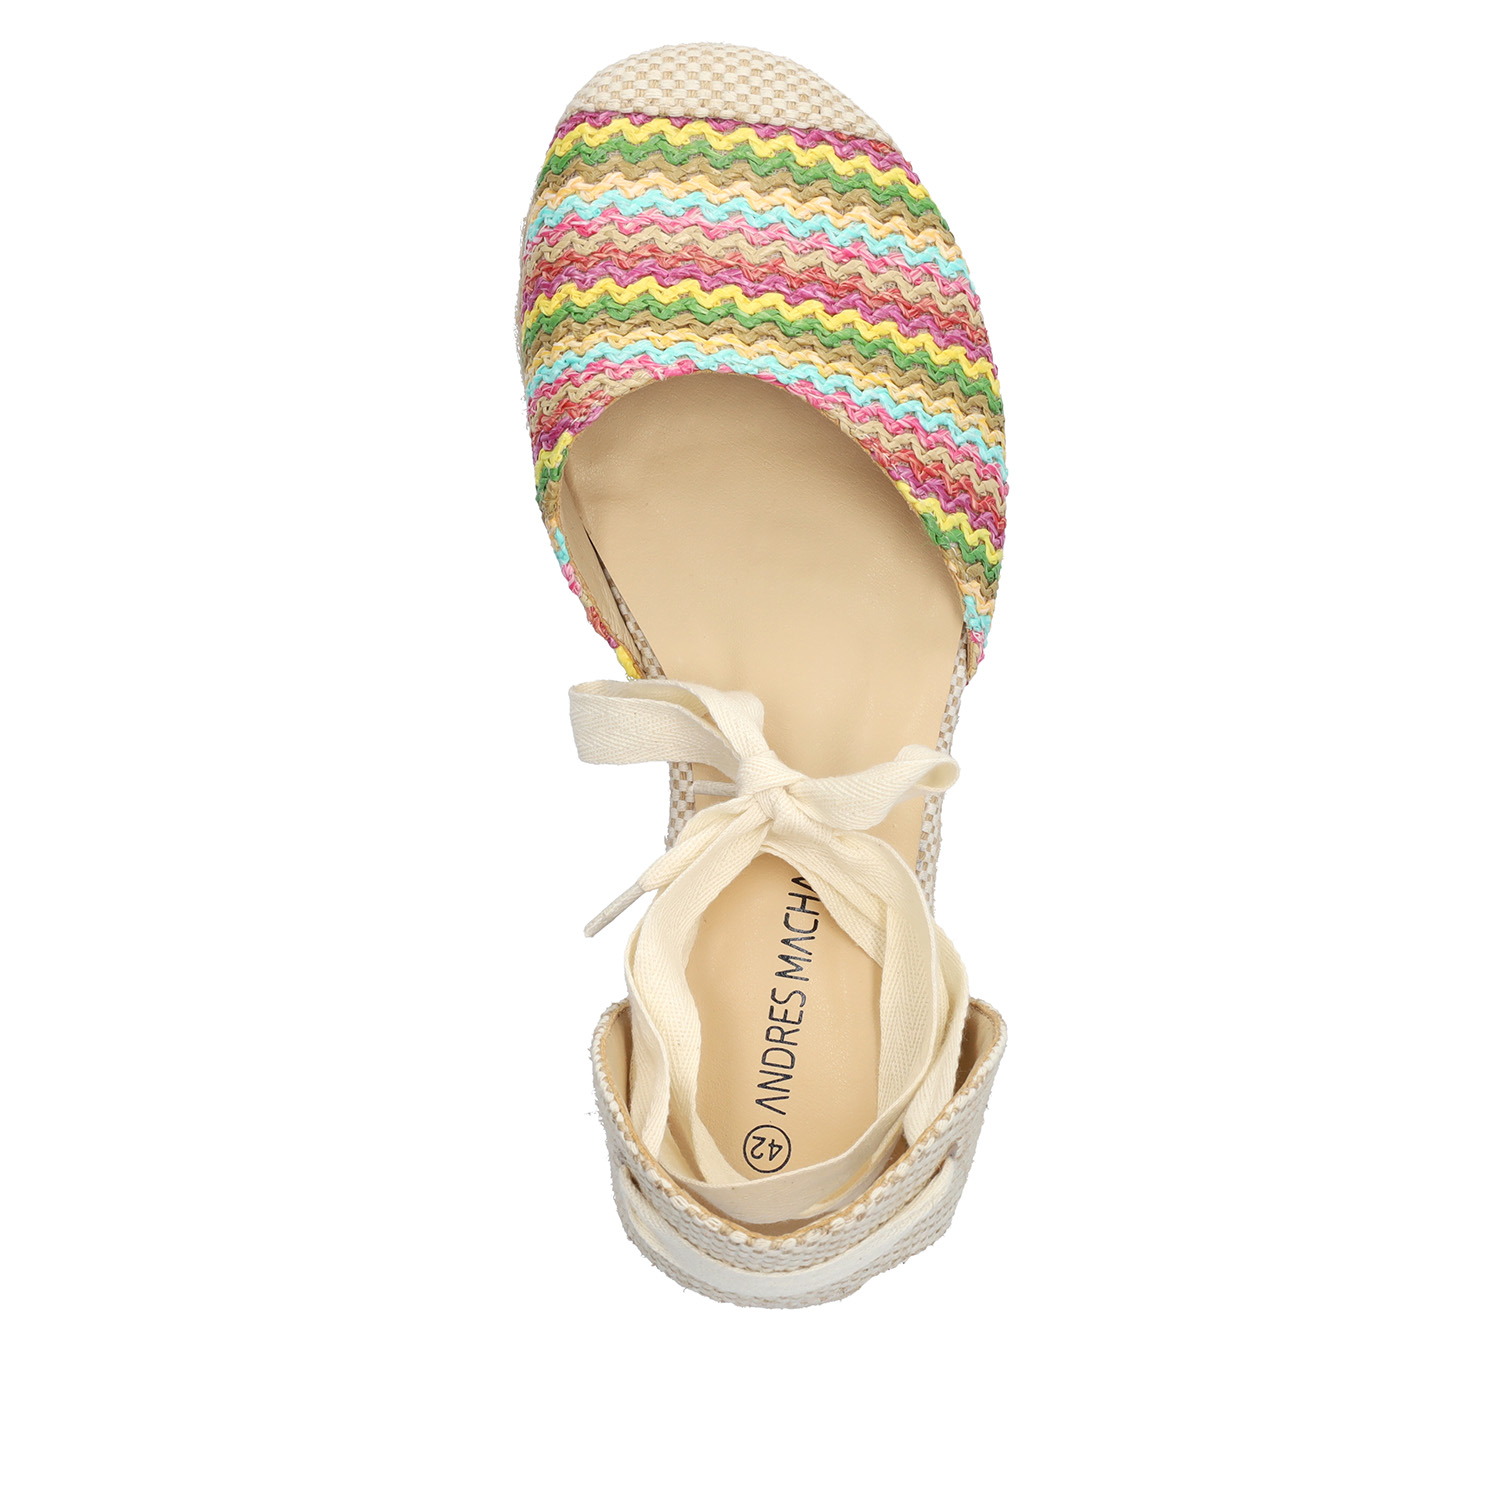 Wedge sandals in multi-colored fabric with jute wedge 